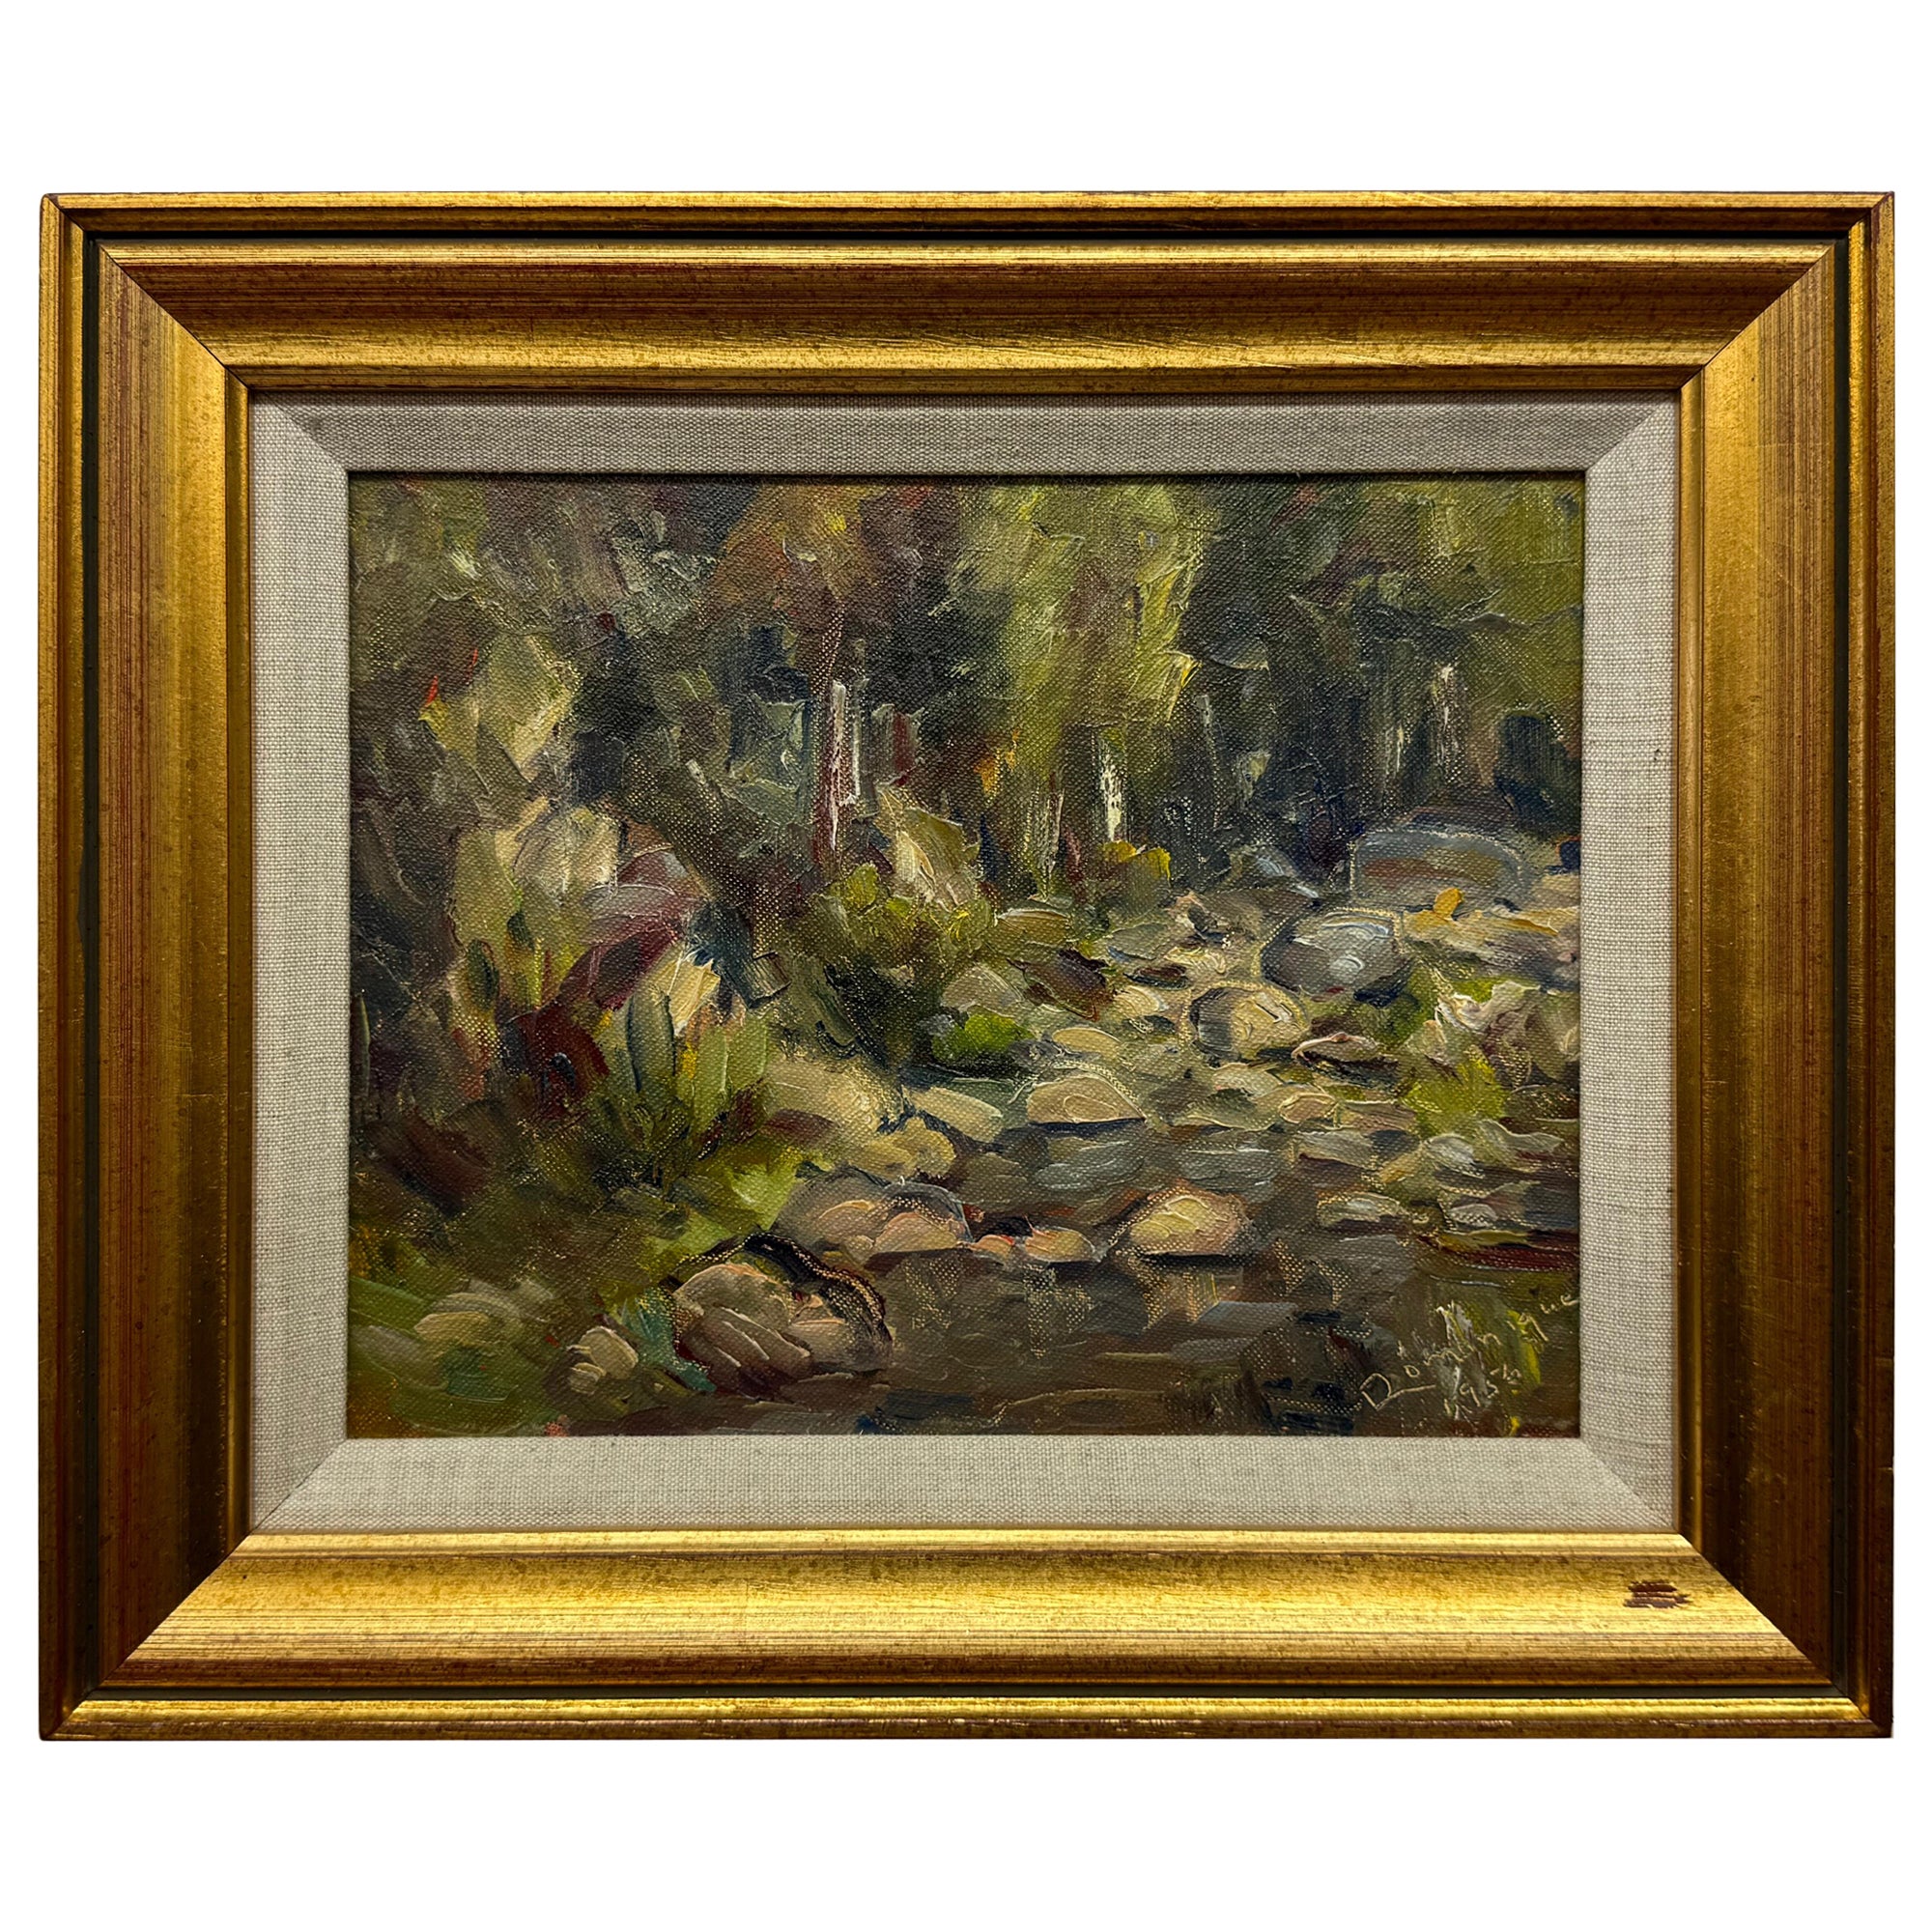 John A Dominique (1893-1994) Beautiful abstract impressionist landscape by listed Swedish artist 

1956

Oil on canvas board

8 x 10 unframed, 11.5 x 13.5 framed
